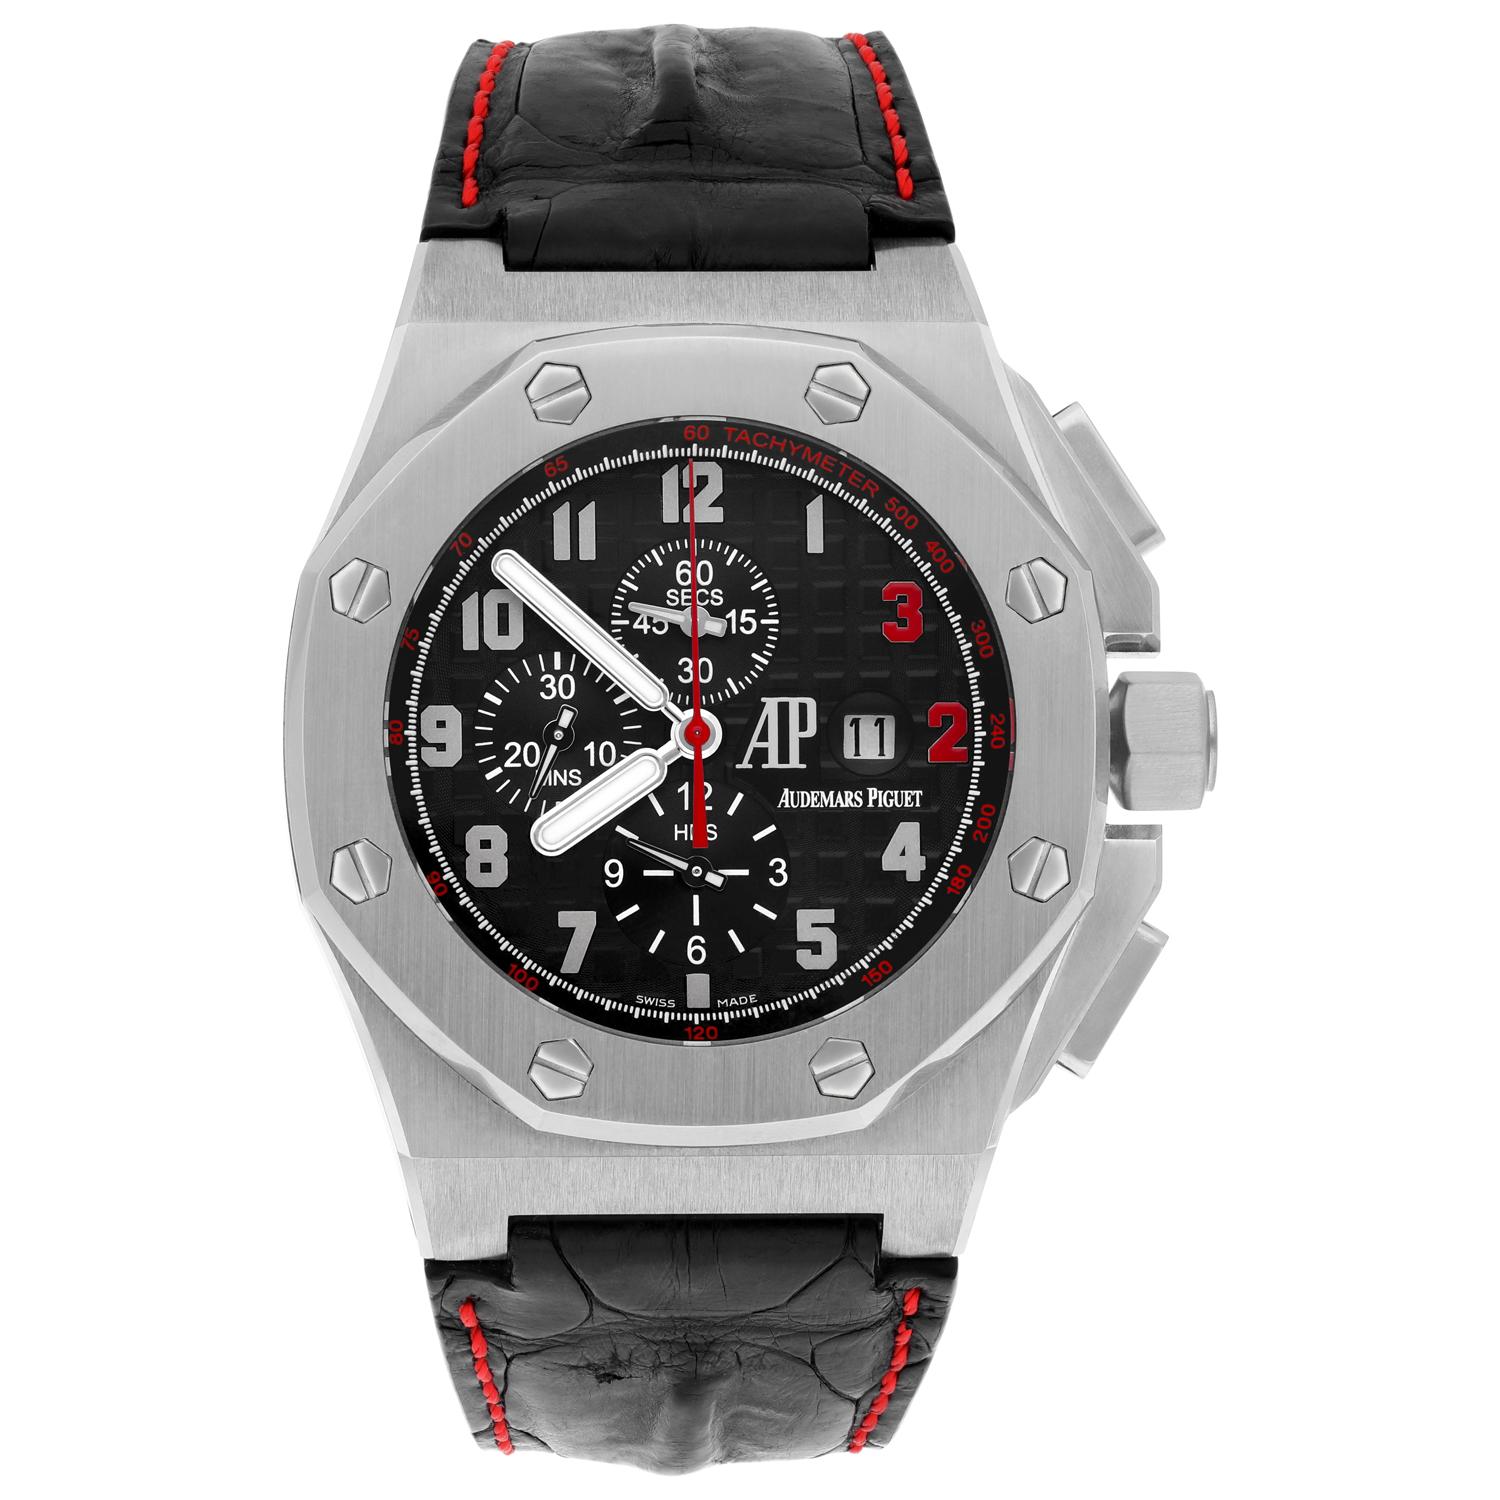 A limited edition 48mm Royal Oak Offshore Shaquille O'Neal wristwatch by Audemars Piguet. Featuring a black dial with arabic numbers, 3 & 2 are coloured in red to reflect the basketball players' jersey number. The watch further features a date